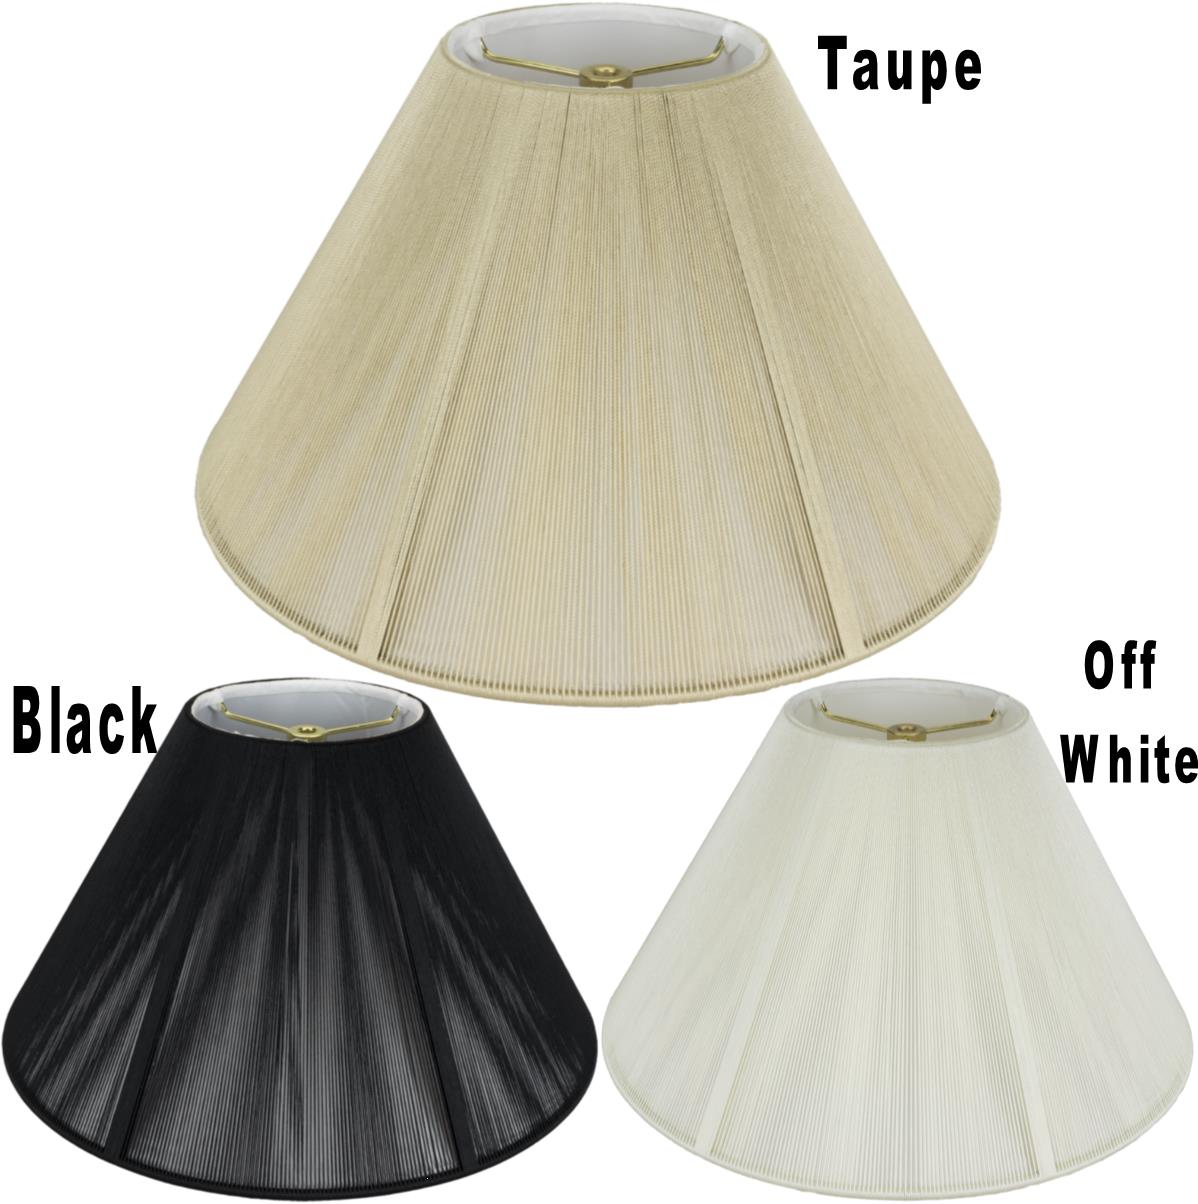 Coolie Silk String Lamp Shade Off White, Taupe, Black 16-22"W